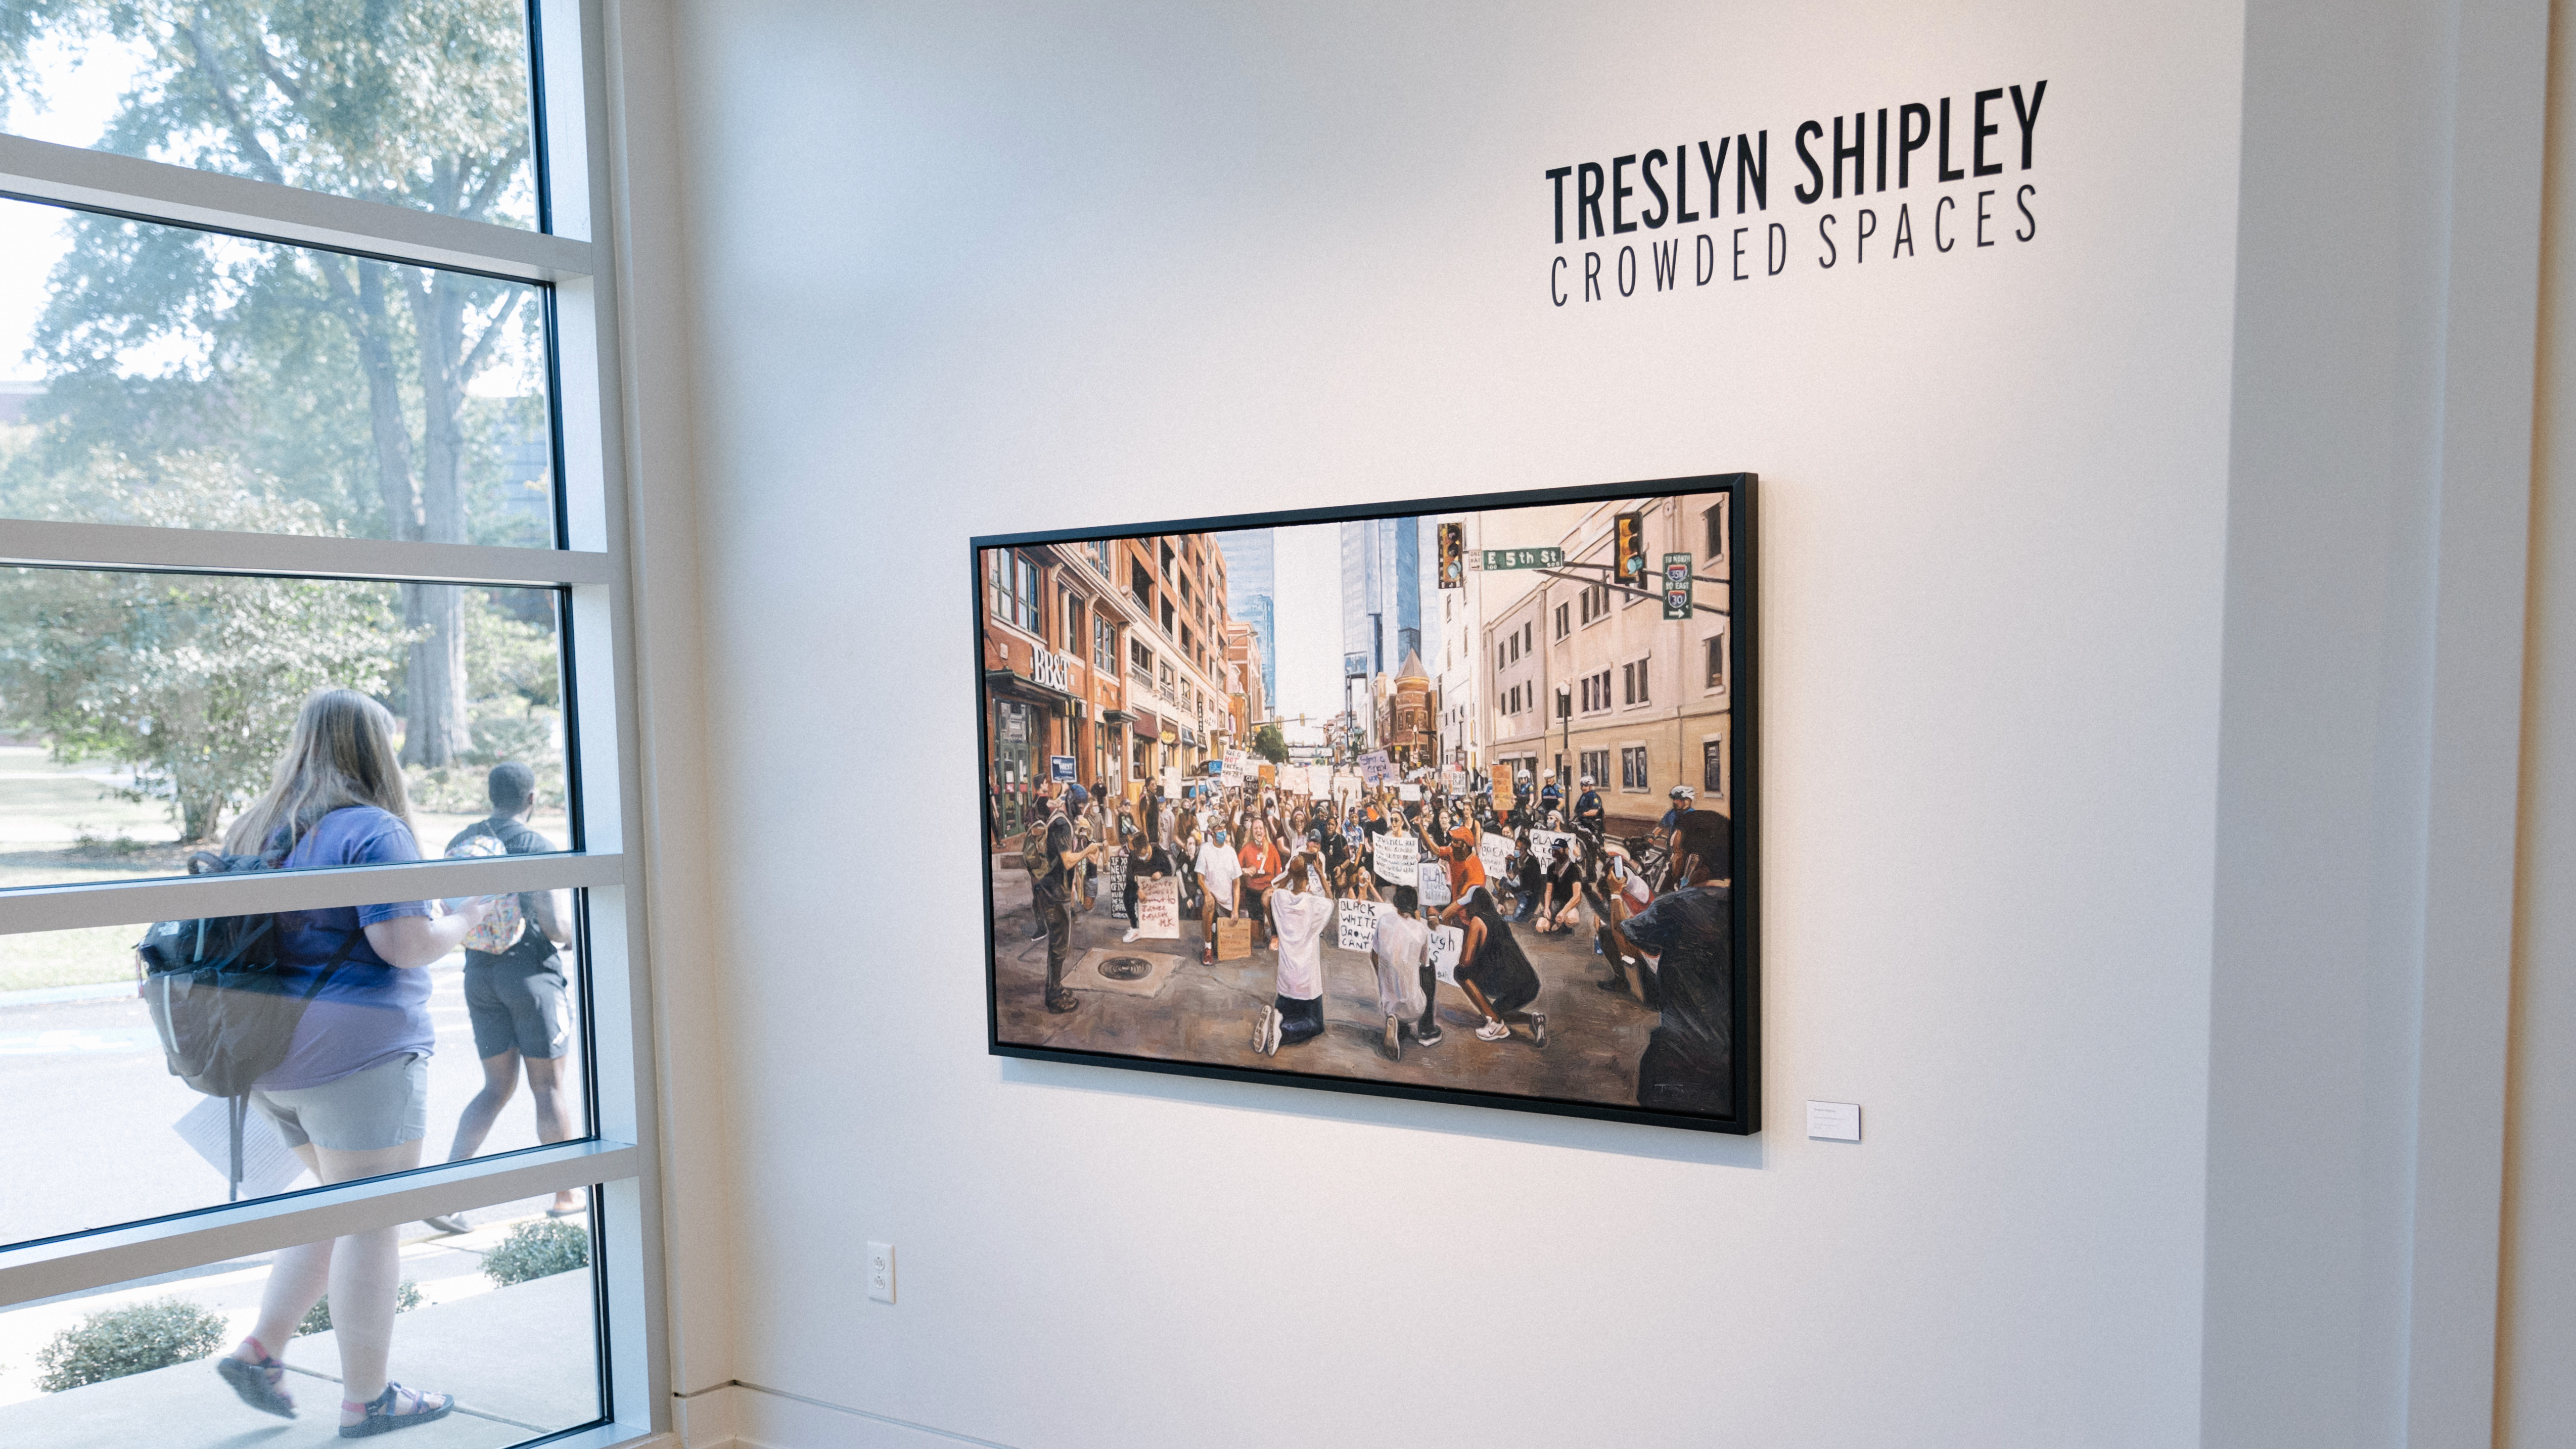 Treslyn Shipley's exhibit titled "Crowded Spaces"